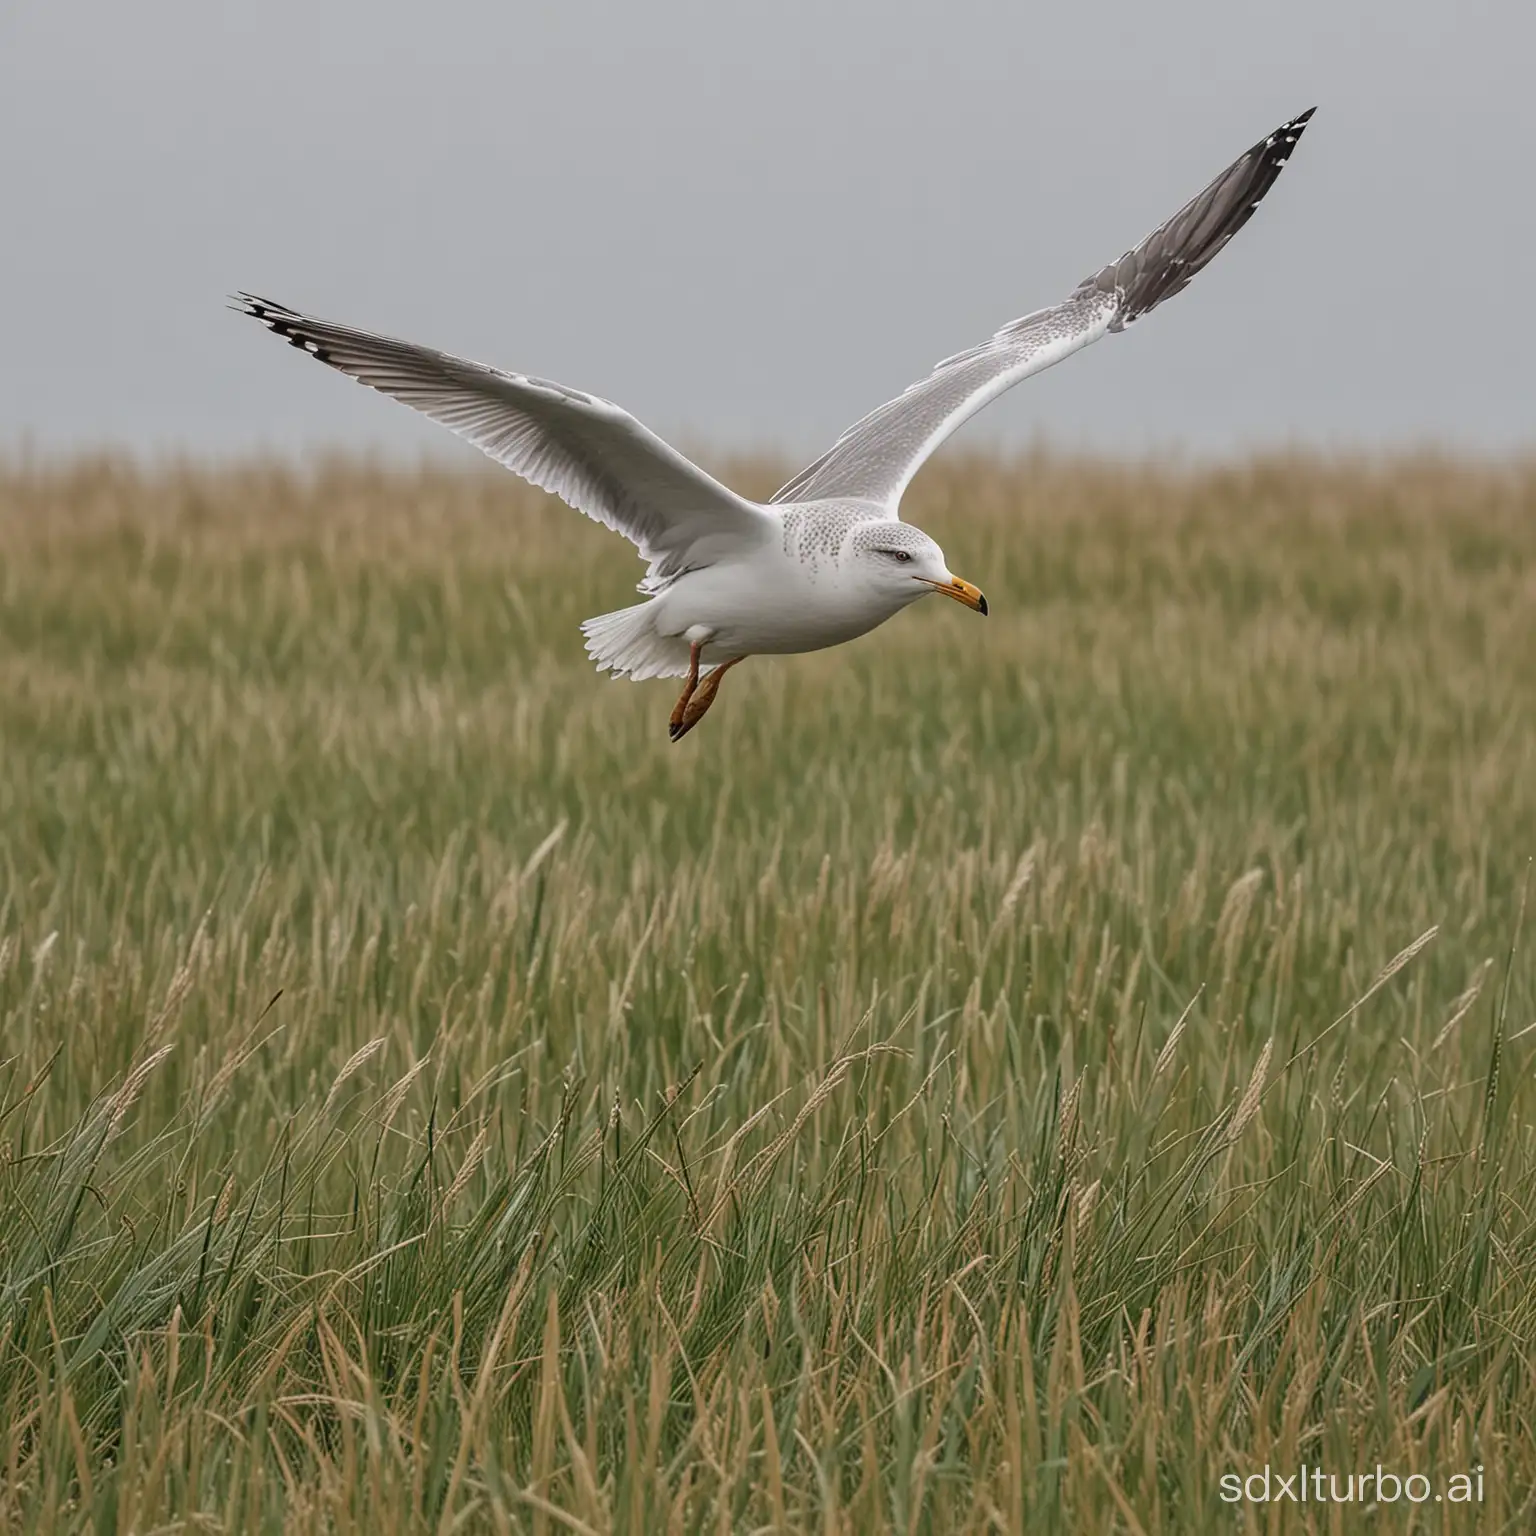 Graceful-Seagull-Soaring-Over-Windswept-Field